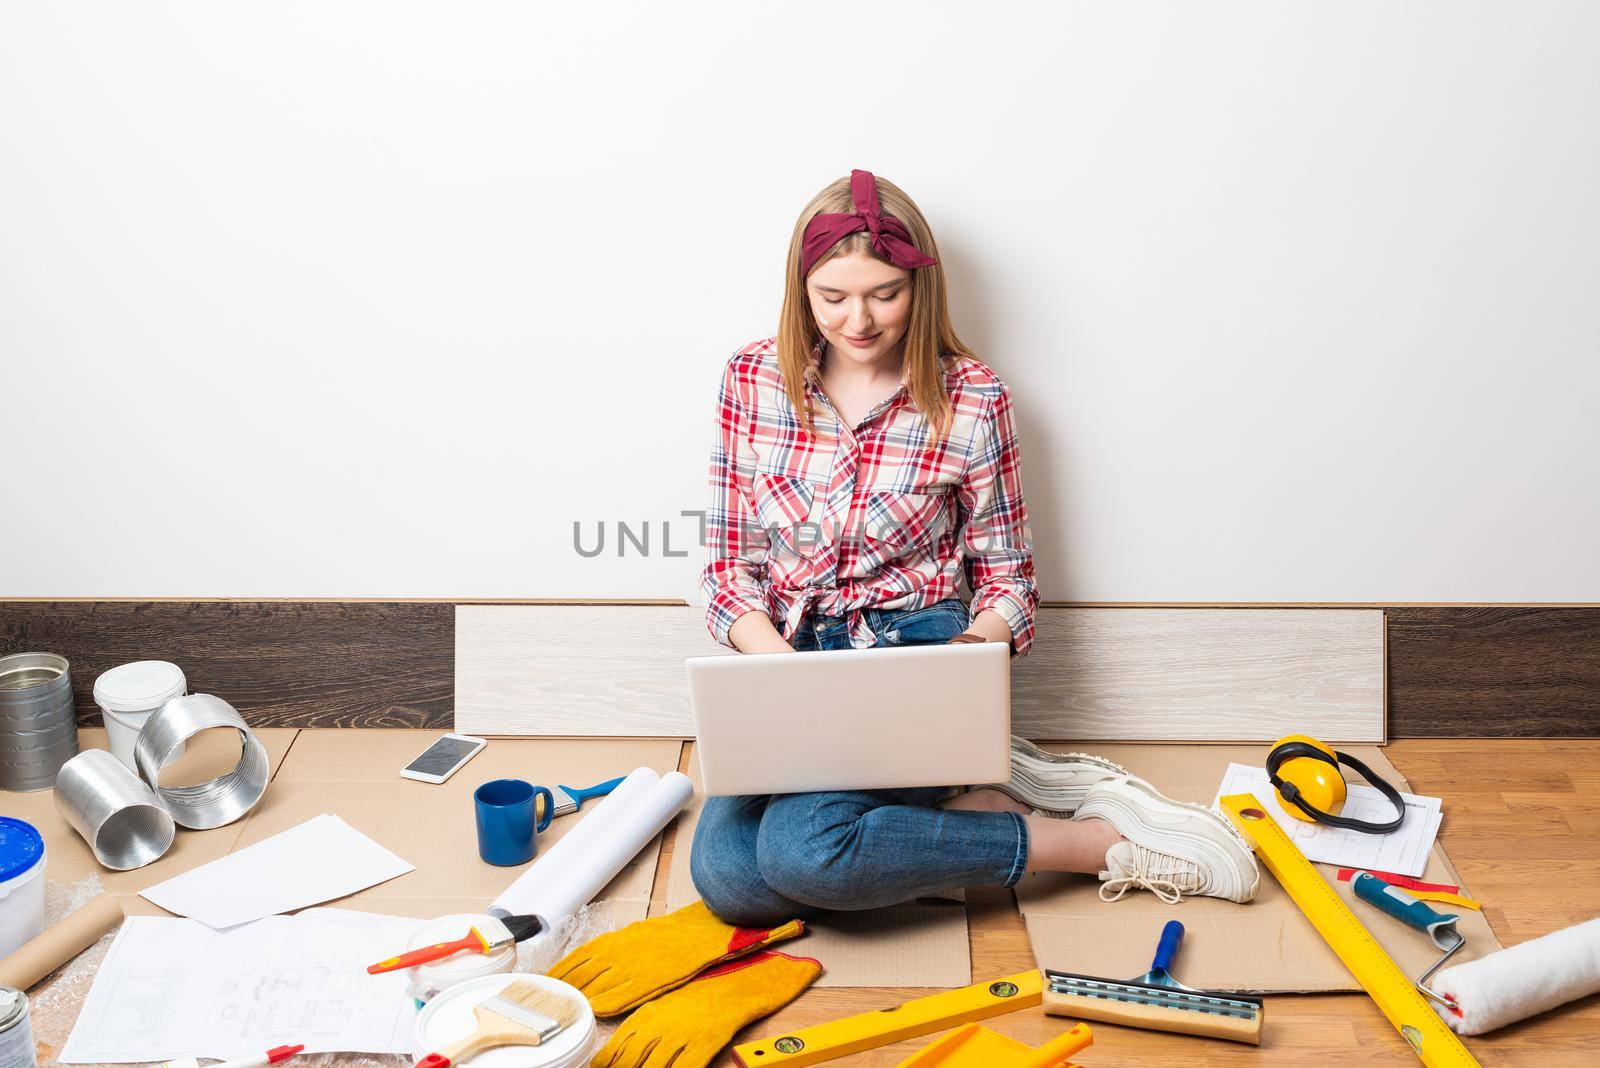 Beautiful girl using laptop at home. Apartment remodeling and house interior renovation concept with copy space. Young attractive woman in red checkered shirt and jeans sitting on floor with computer.